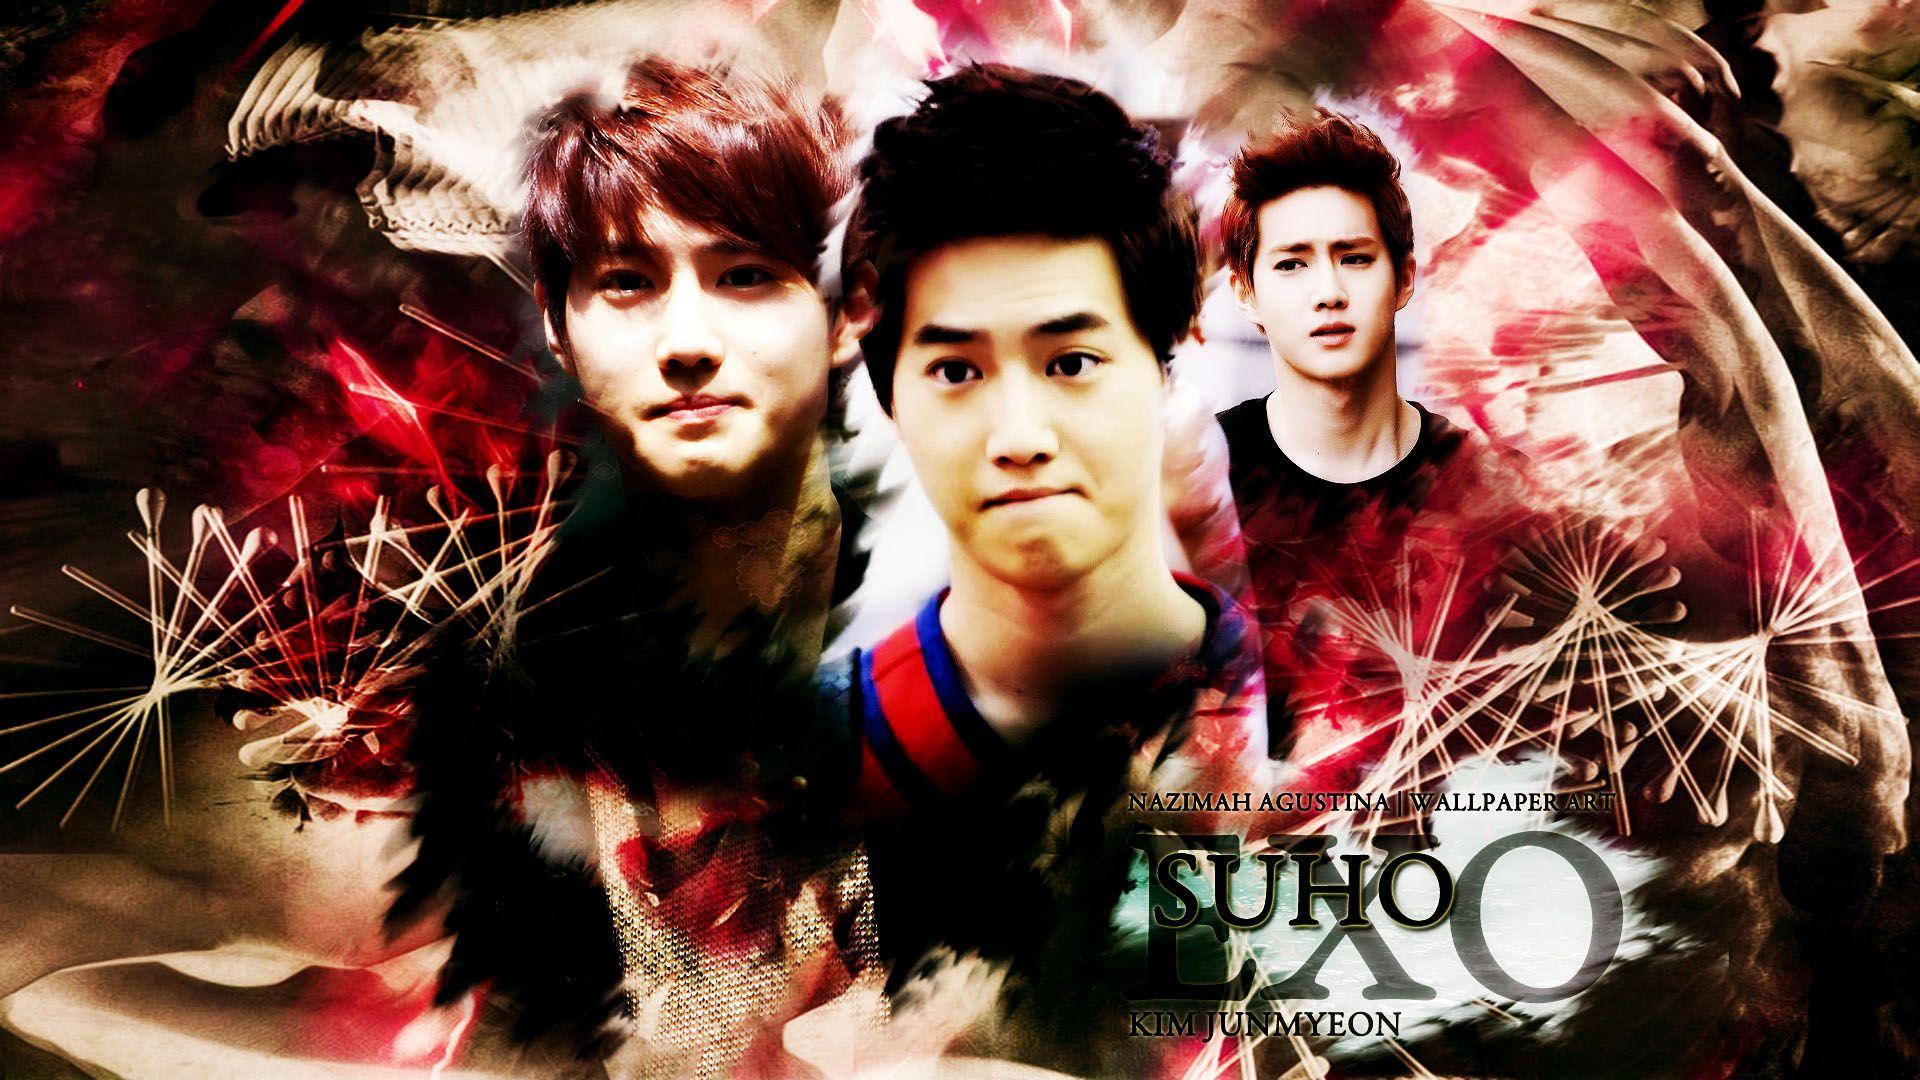 SUHO exo kim junmyeon leader wallpaper abstract red black